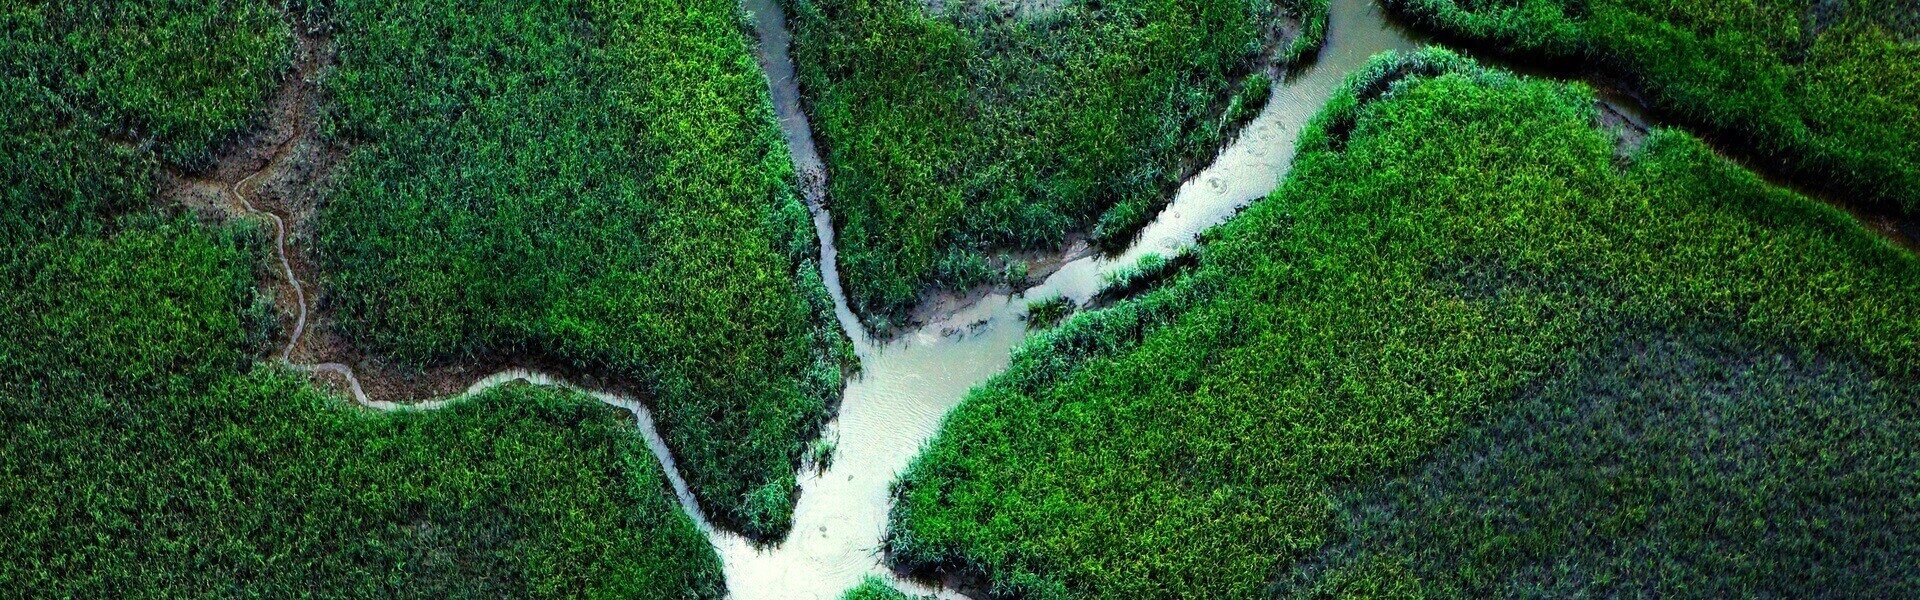 A river flowing through the forest